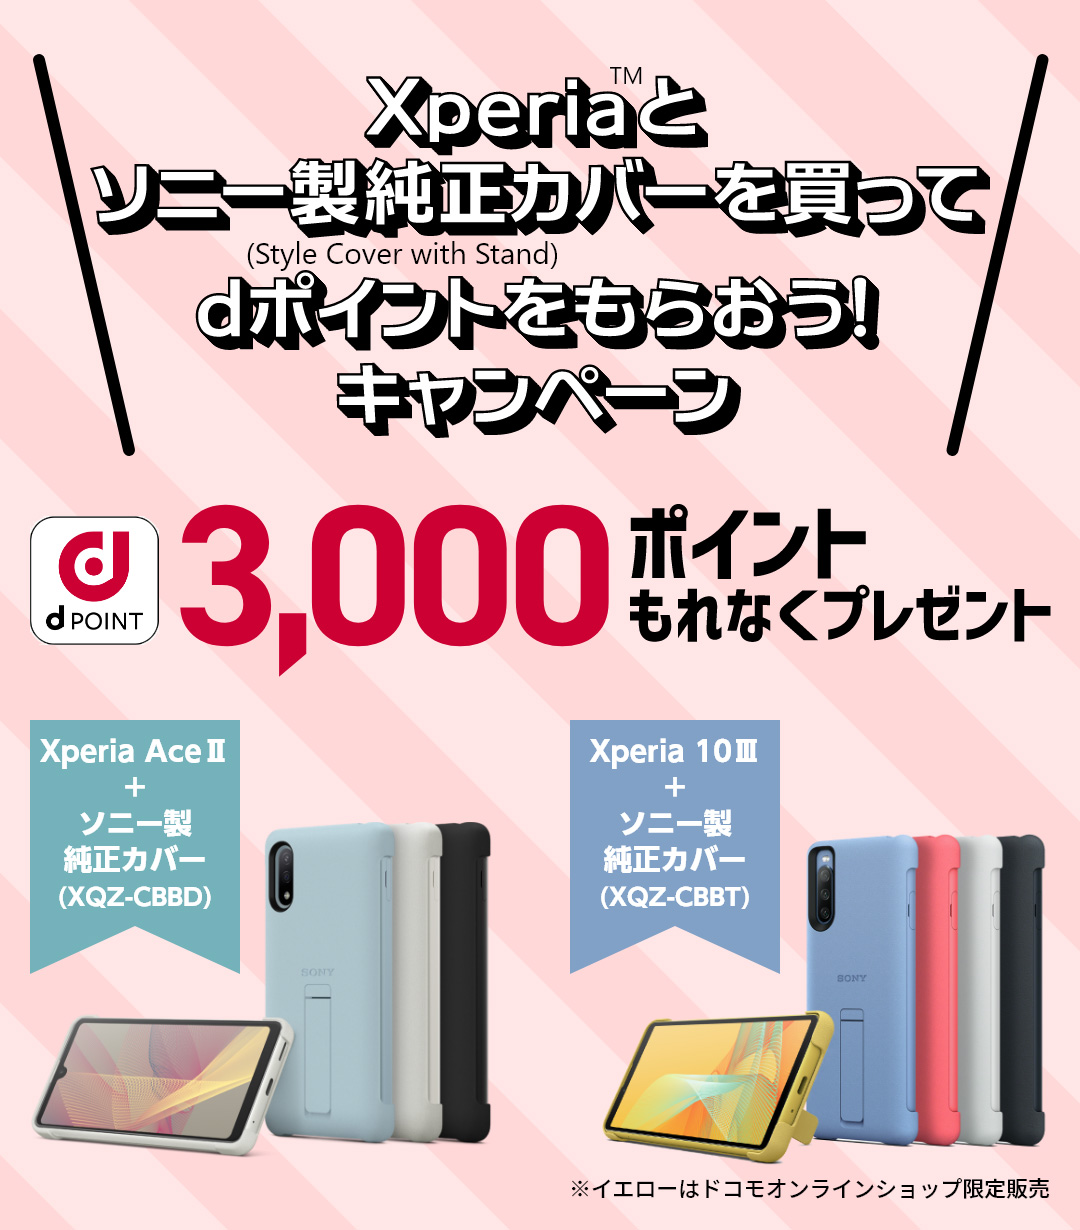 XperiaTMとソニー製純正カバー（Style Cover with Stand）を買ってdポイントをもらおう！キャンペーン d POINT 3,000ポイントもれなくプレゼント